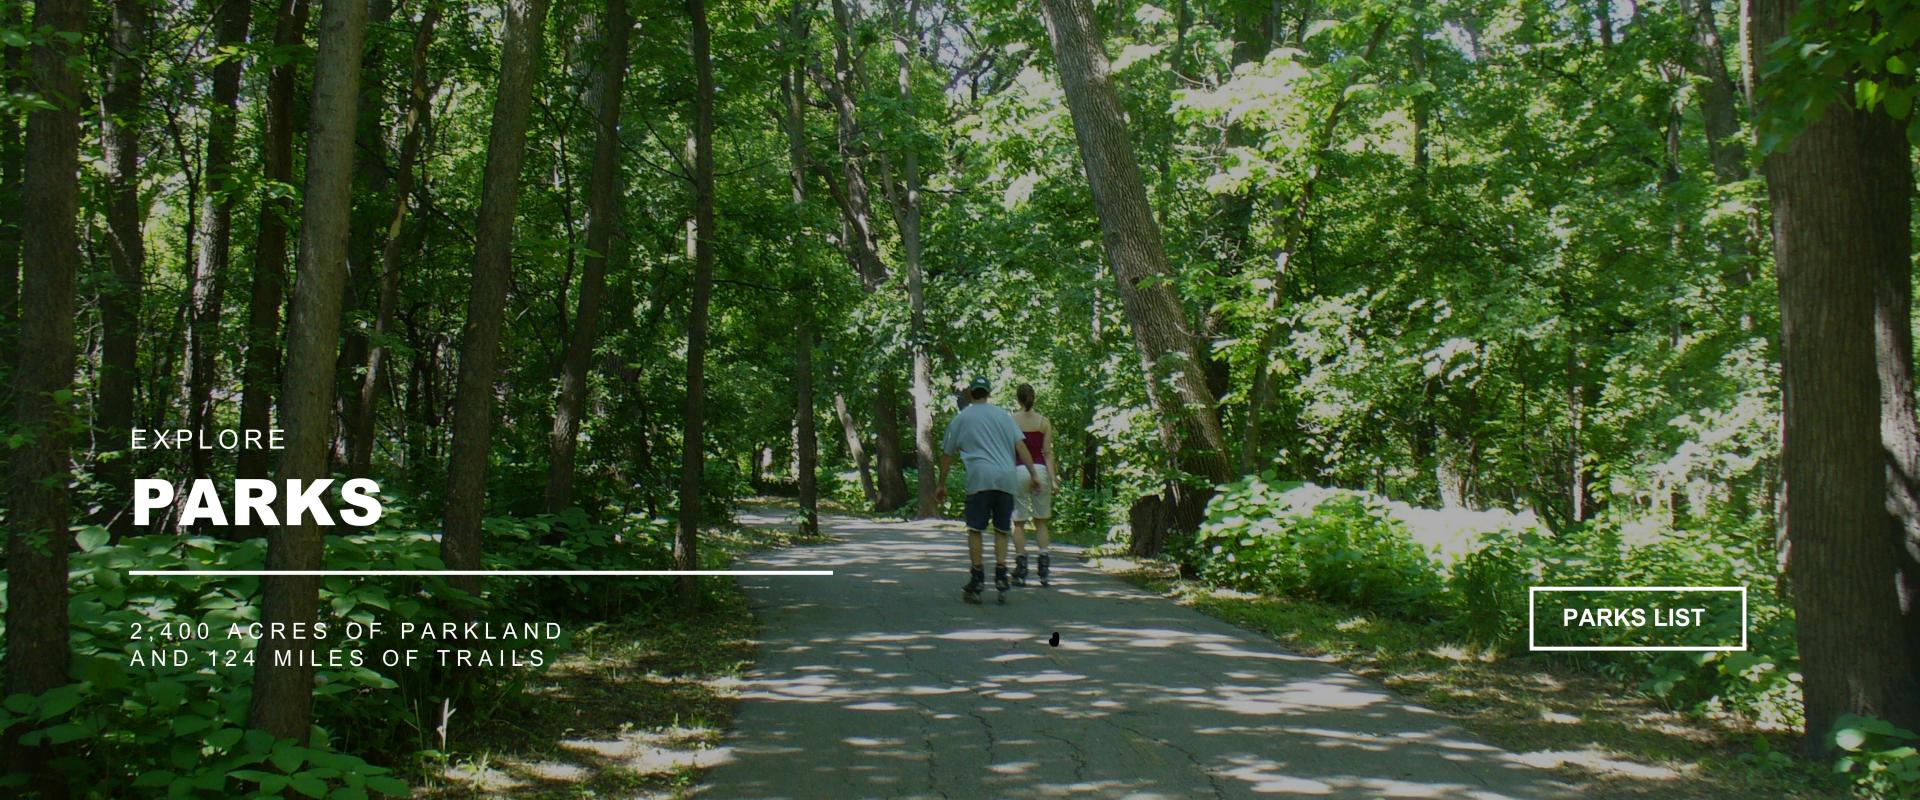 Explore PARKS - 2,400 acres of parkland and 124 miles of trails  - image of two people rollerblading on a path through trees